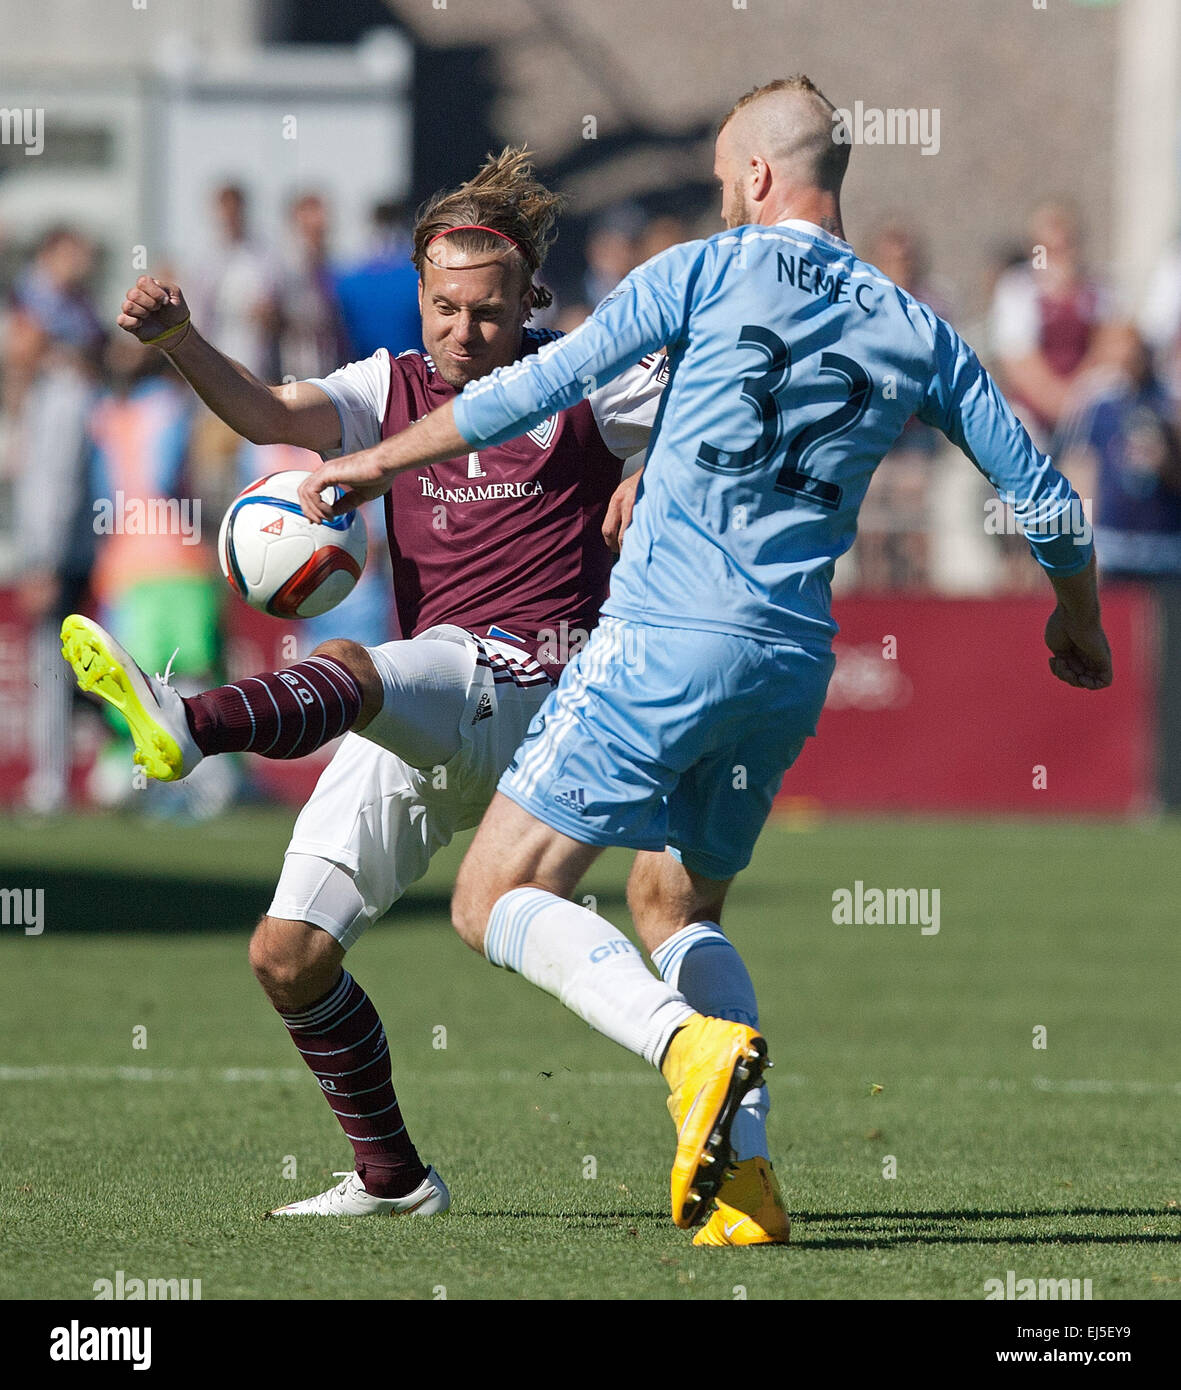 Commerce City, Colorado, USA. 21st Mar, 2015. Rapids D MARC BURCH, left, battles for control of the ball with NY F ADAM NEMEC, right, during the 2nd. Half at Dicks Sporting Goods Park during the Rapids Home Opener Saturday afternoon. Rapids & New York City FC draw to 0-0. © Hector Acevedo/ZUMA Wire/Alamy Live News Stock Photo